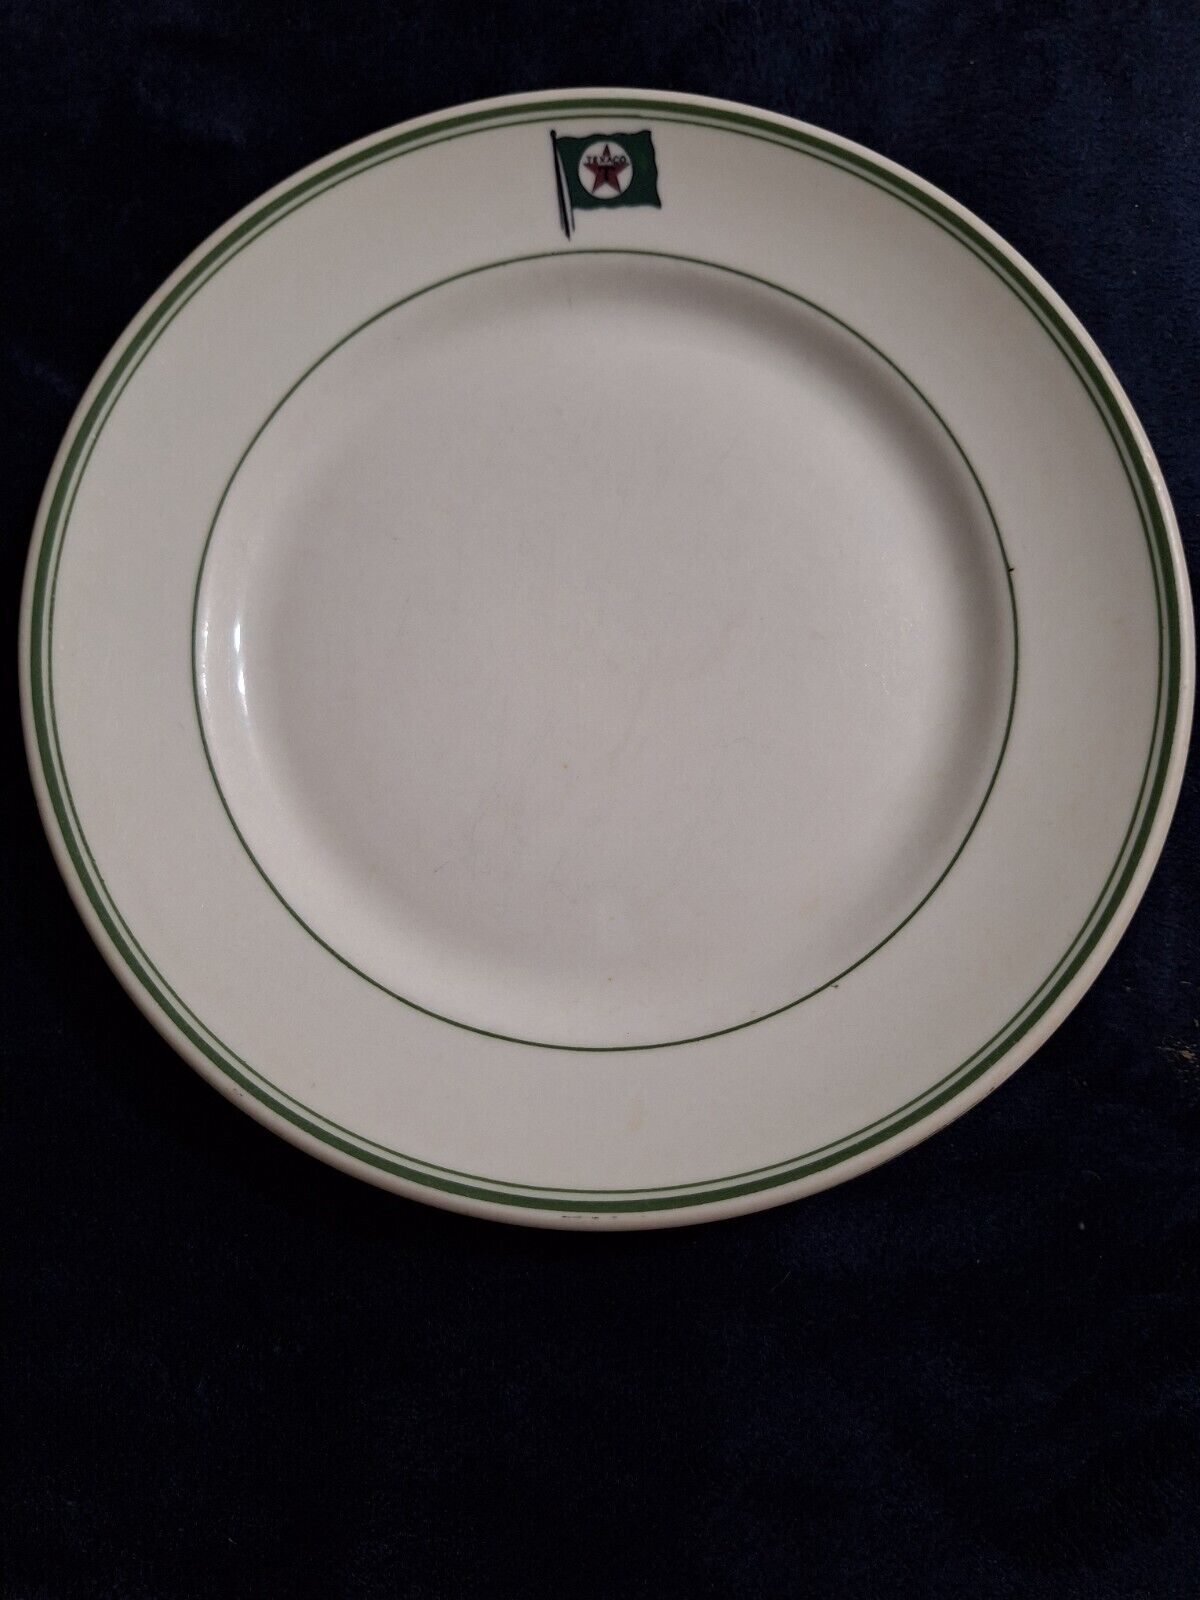 Vintage  TEXACO  Marine Oil Tanker 9 Inch Plate Restaurant Ware by Mayer China